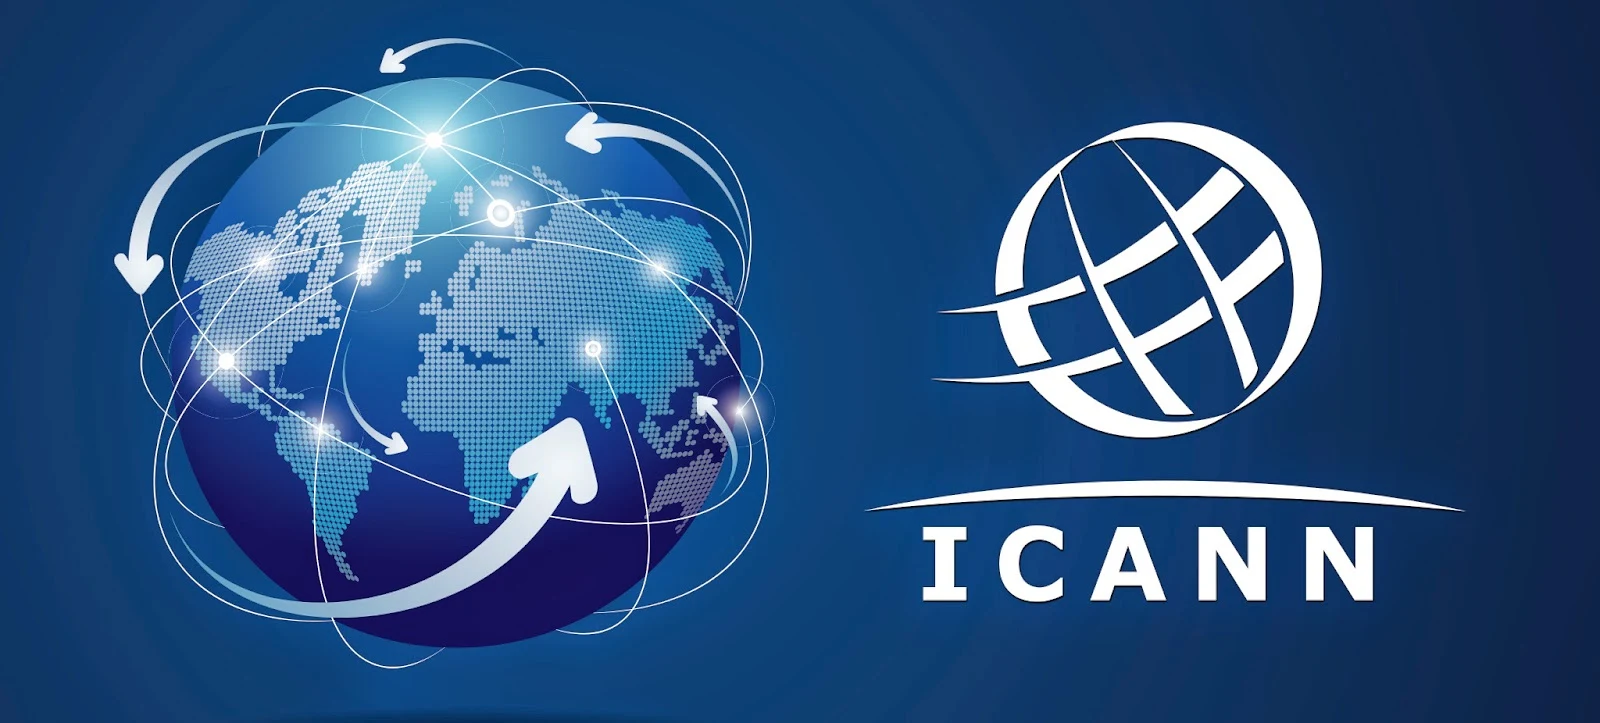 ICANN got Hacked, Fell Victim to a Spear Phishing Attack, ICANN got Hacked, Internet Corporation for Assigned Names and Numbers, hacking web server, information security experts, cyber security team, info security experts, cyber myths, information security experts, pentesting tools